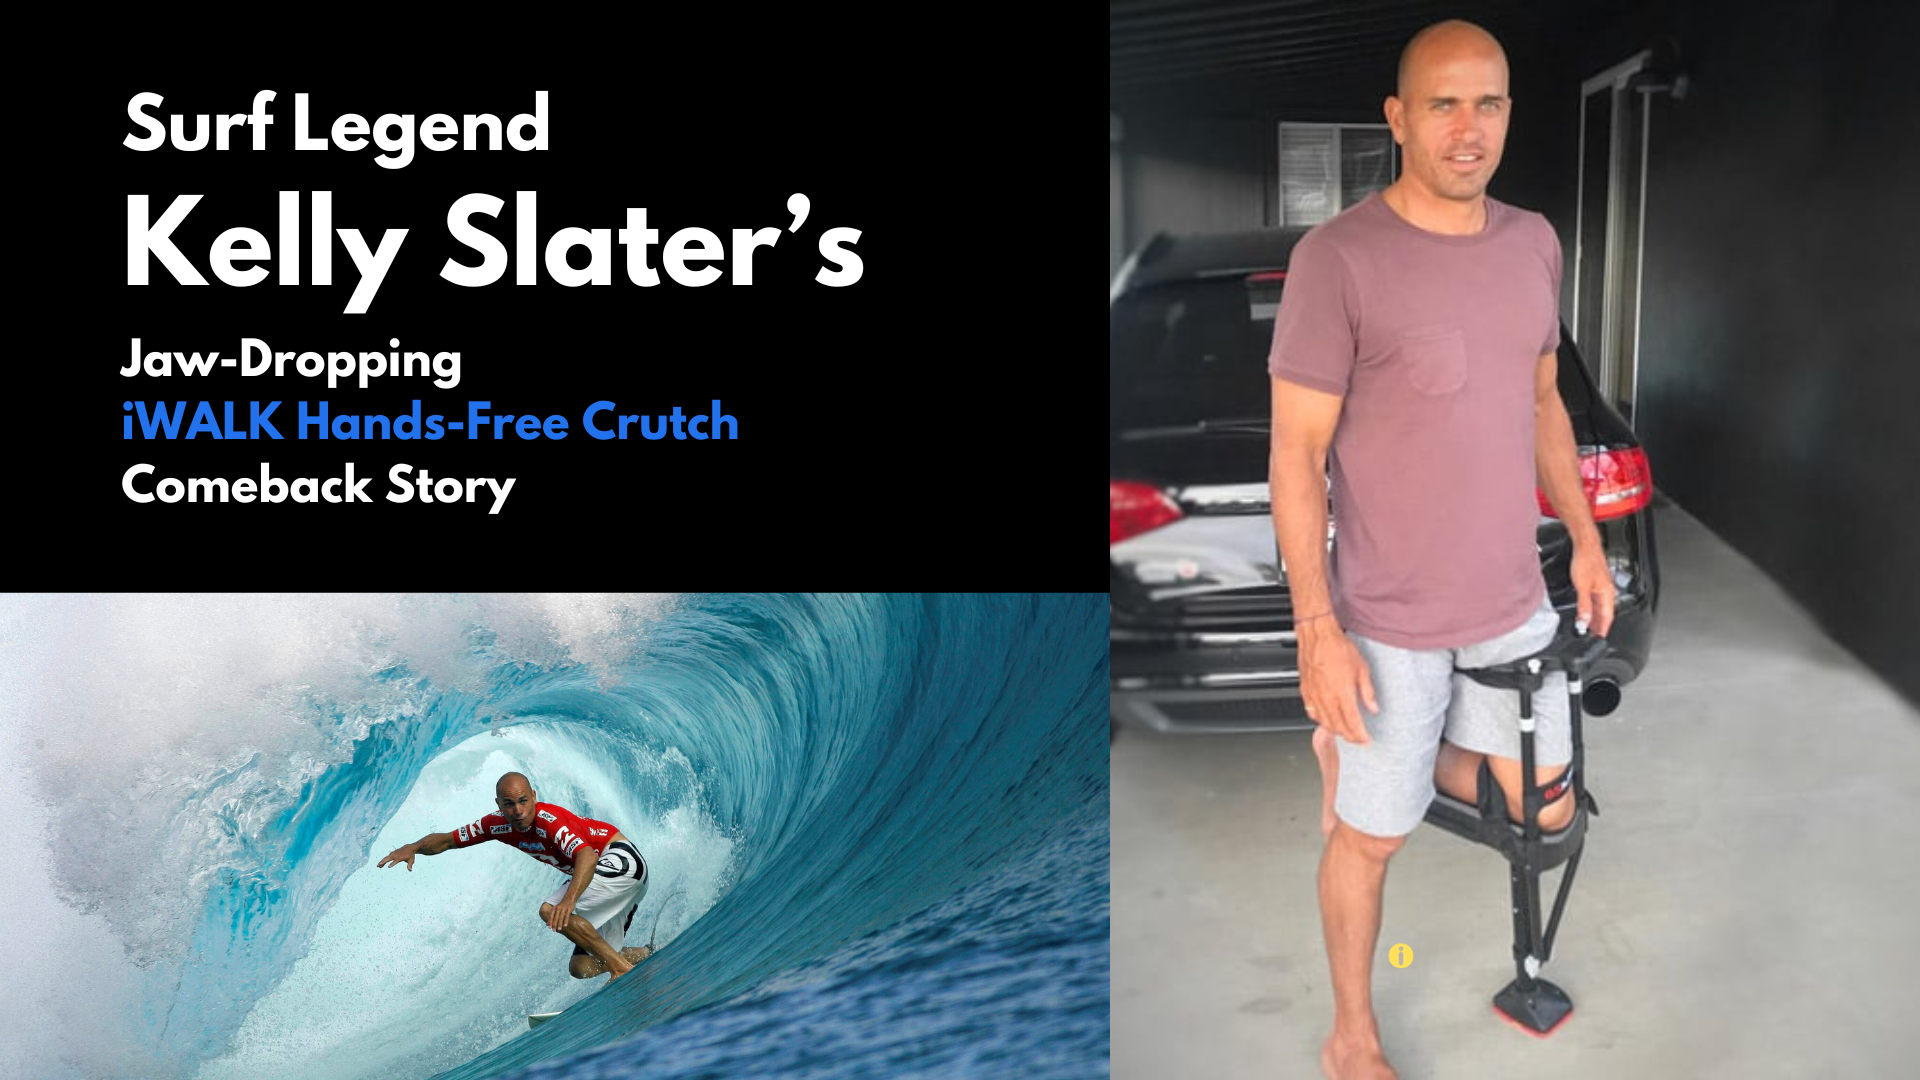 Kelly Slater using the iWALK hands-free crutch for Jones Fracture, Broken Foot, Lisfranc, recovery